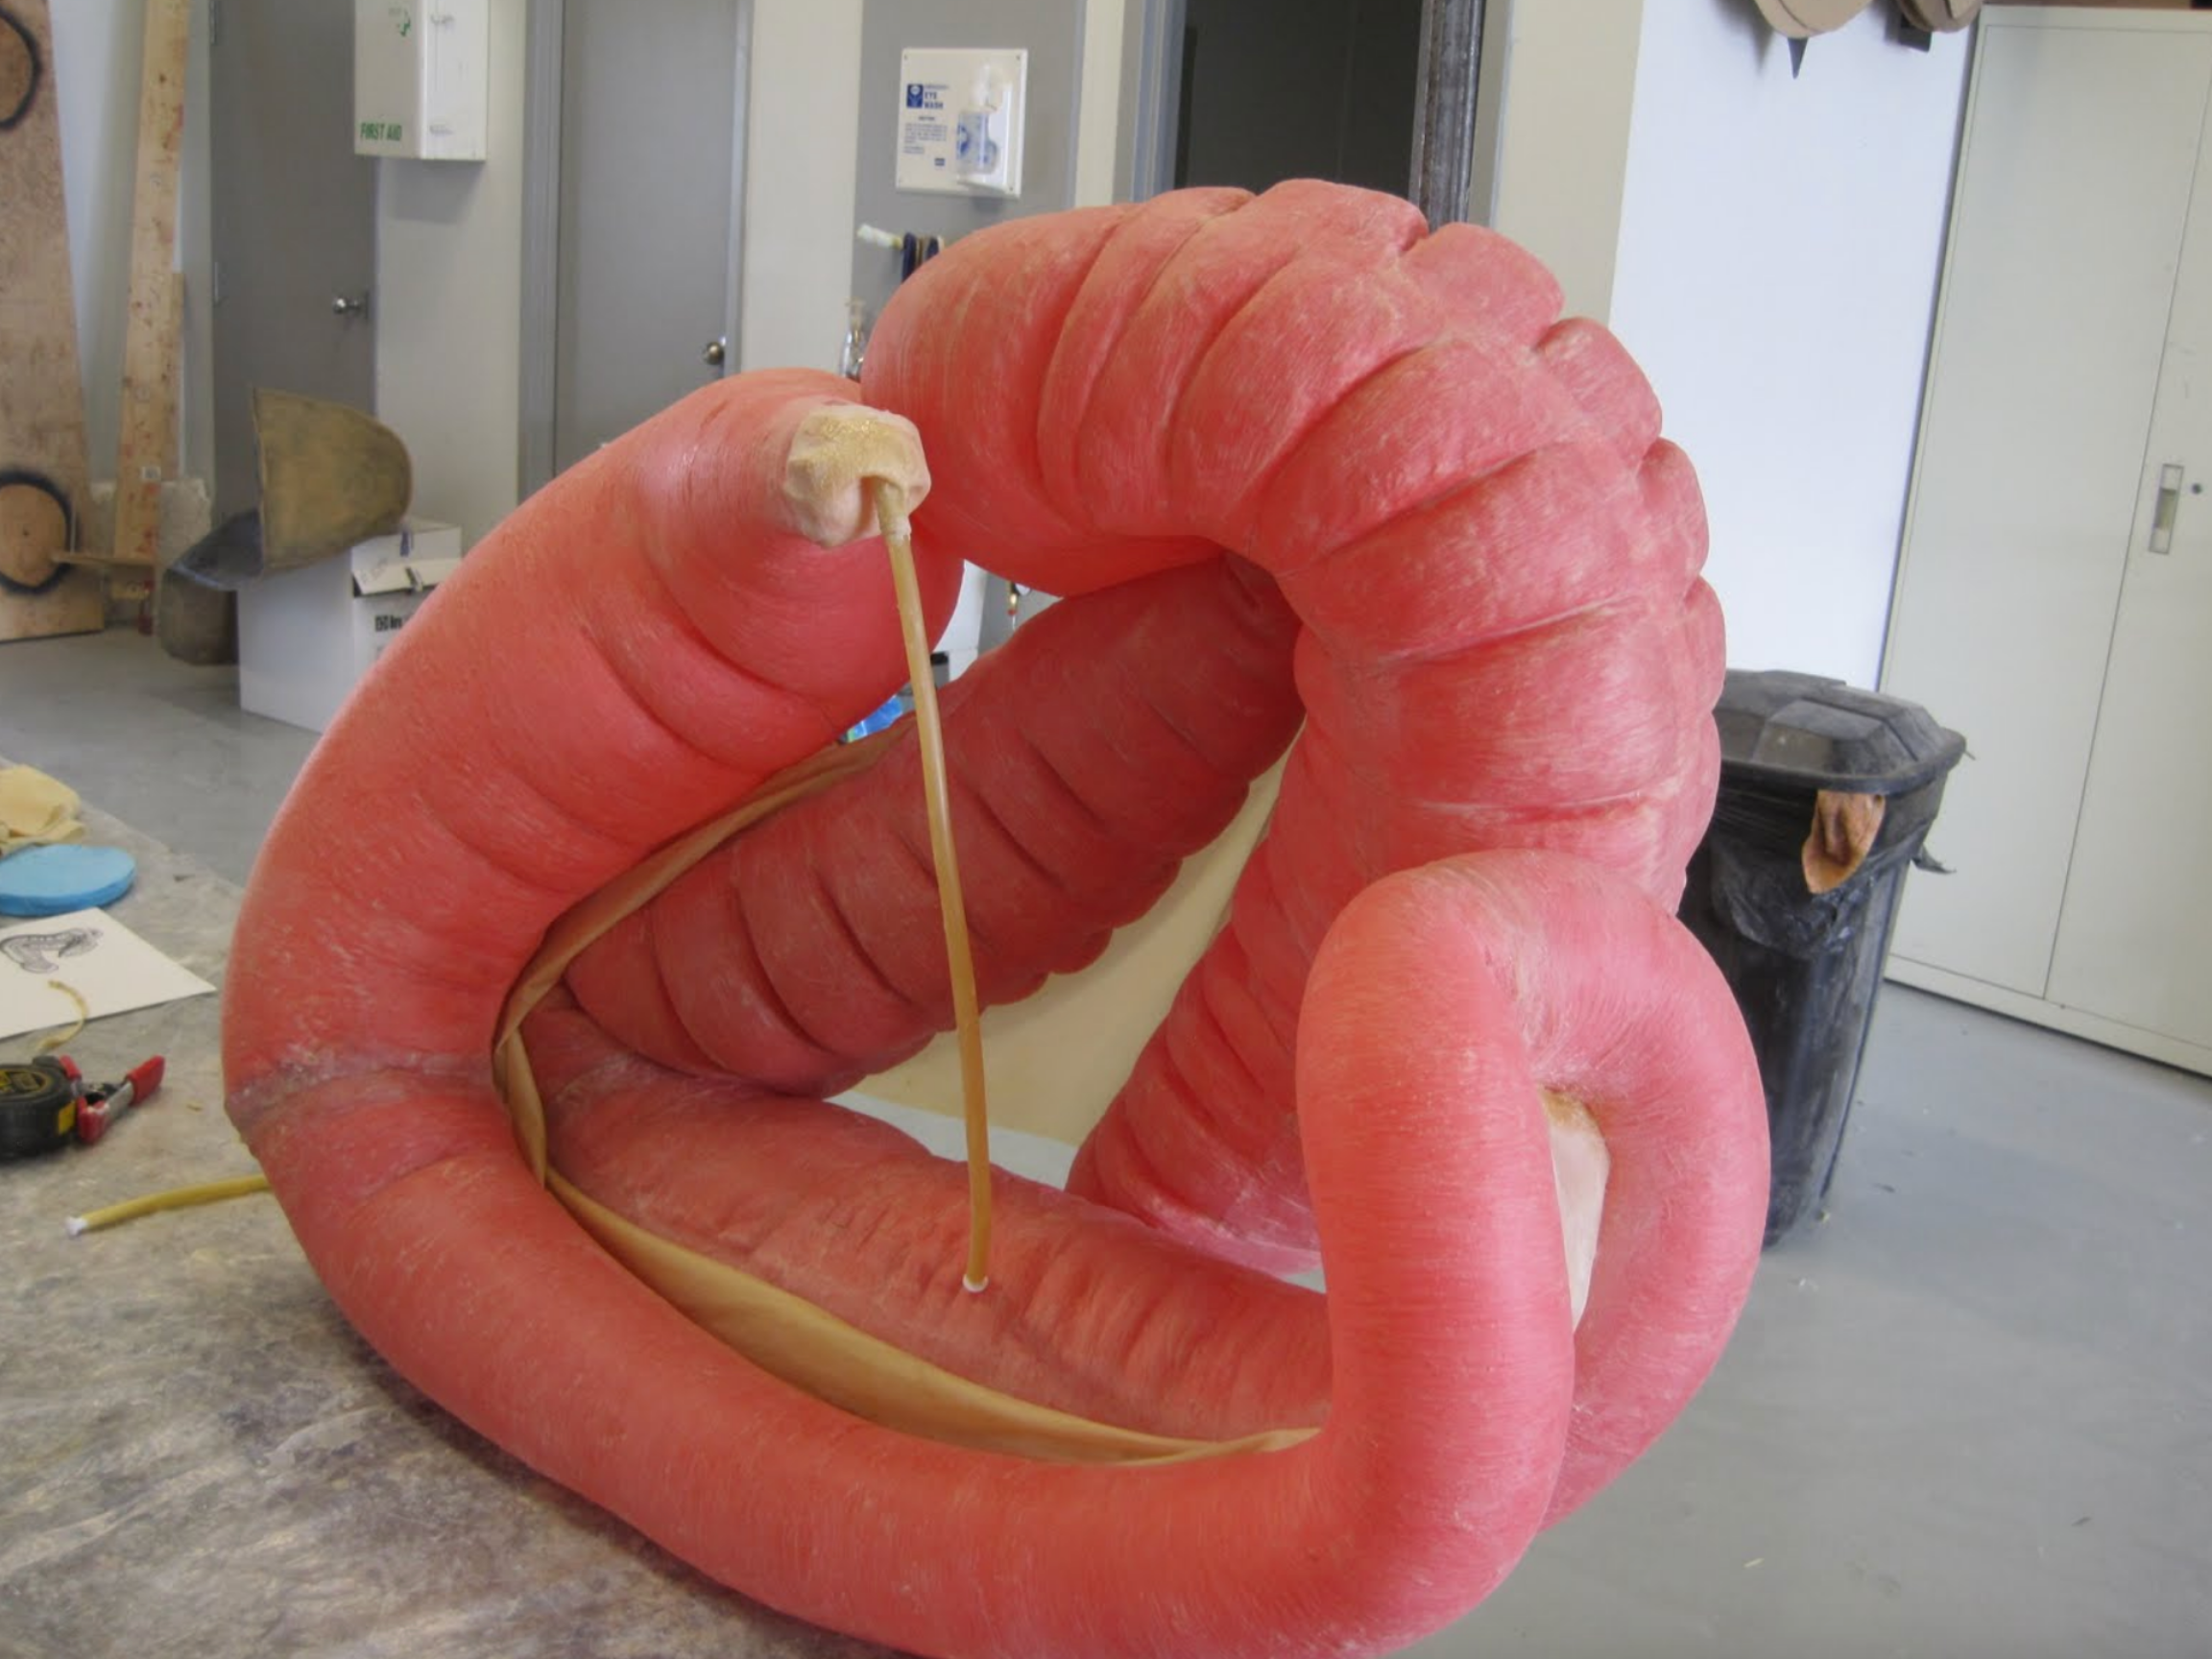  This photo shows the inflated equine GI tract model, ready for final paint and detailing. The finished piece will then be mounted into the horse model along with representations of the spleen and kidney. 